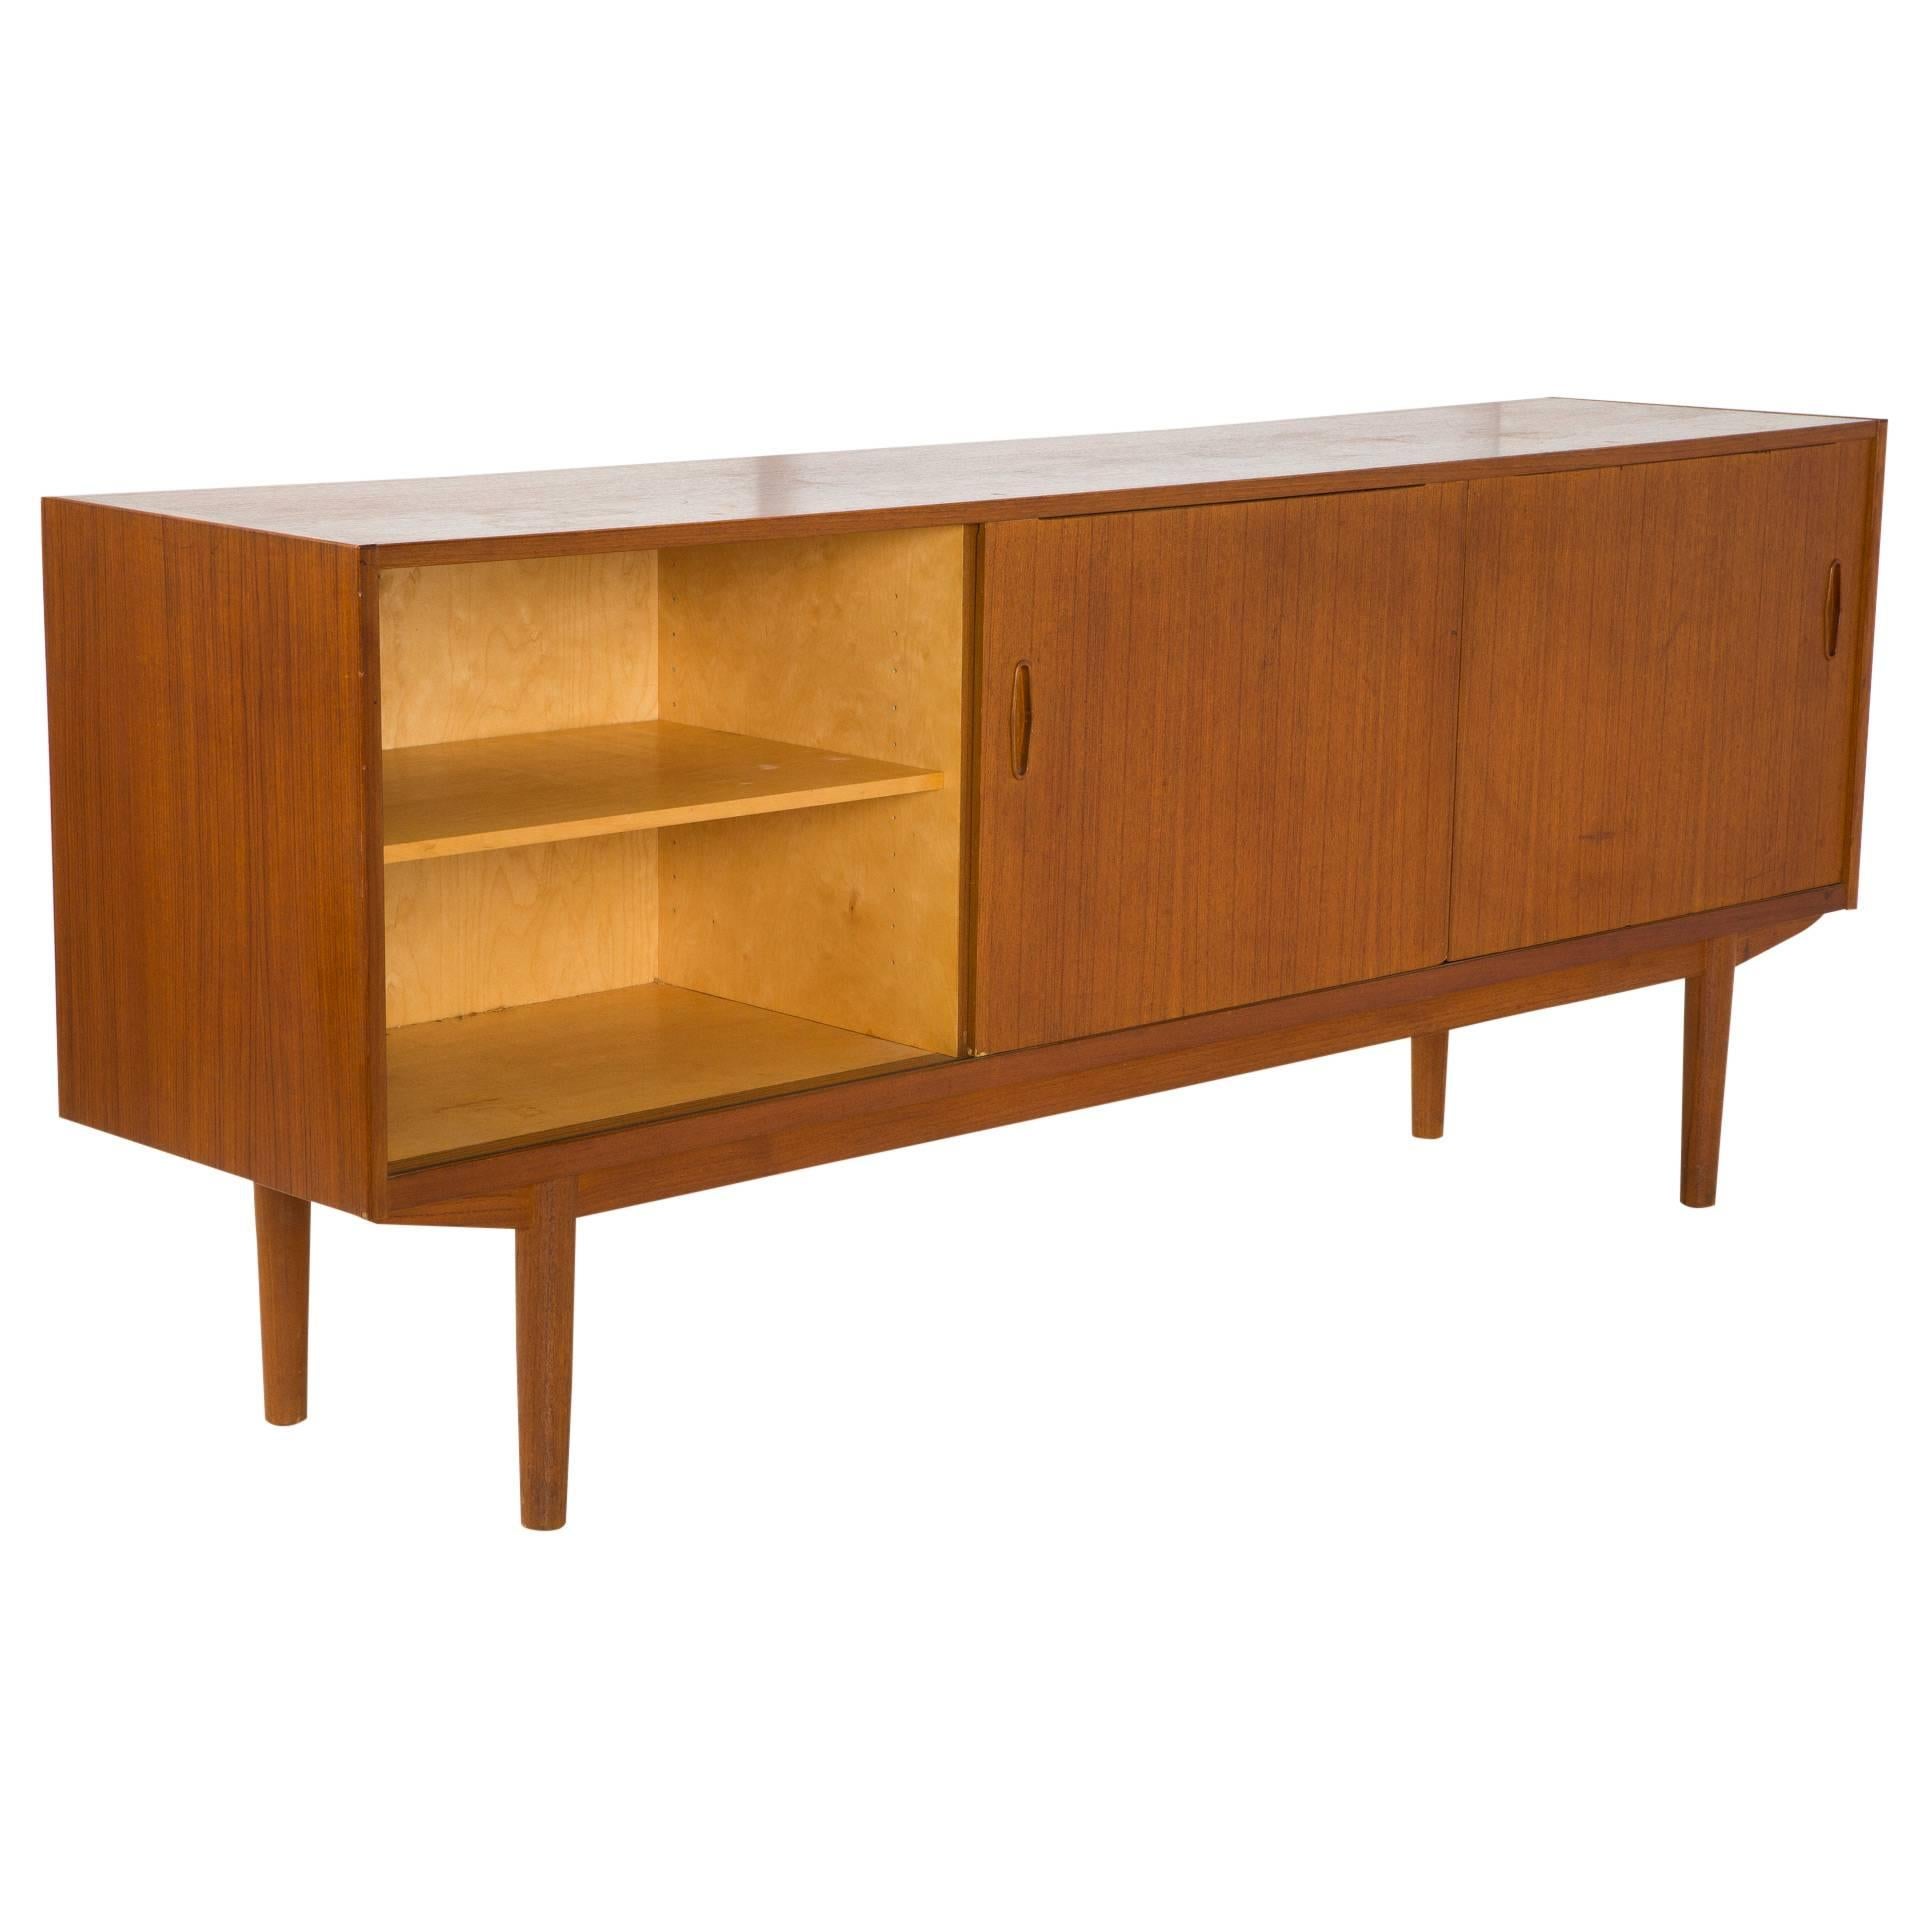 Gorgeous Mid Century Modern Credenza with louvered design. Two doors on each side with birch interiors and removable shelves. 4 drawers in center that open and close nicely. Top drawers has blue felt with dividers. Troeds Bjarnum made in Sweden logo